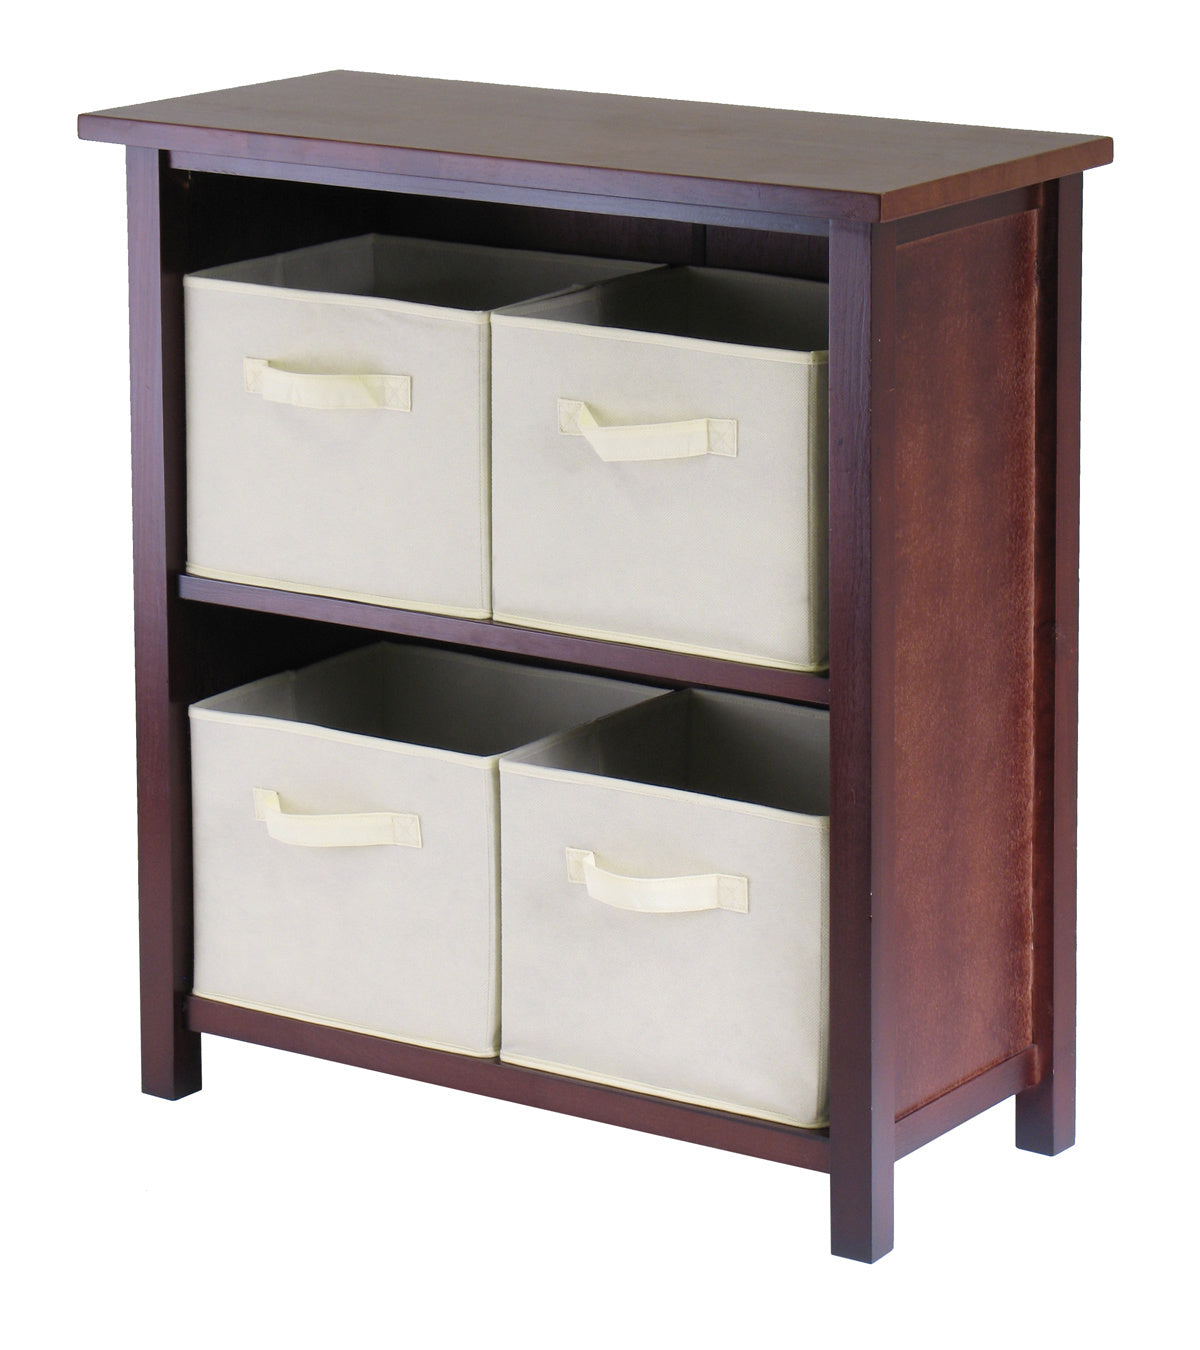 A Verona 2-Section M Storage Shelf with 4 Foldable Beige Fabric Baskets with three fabric baskets on it.